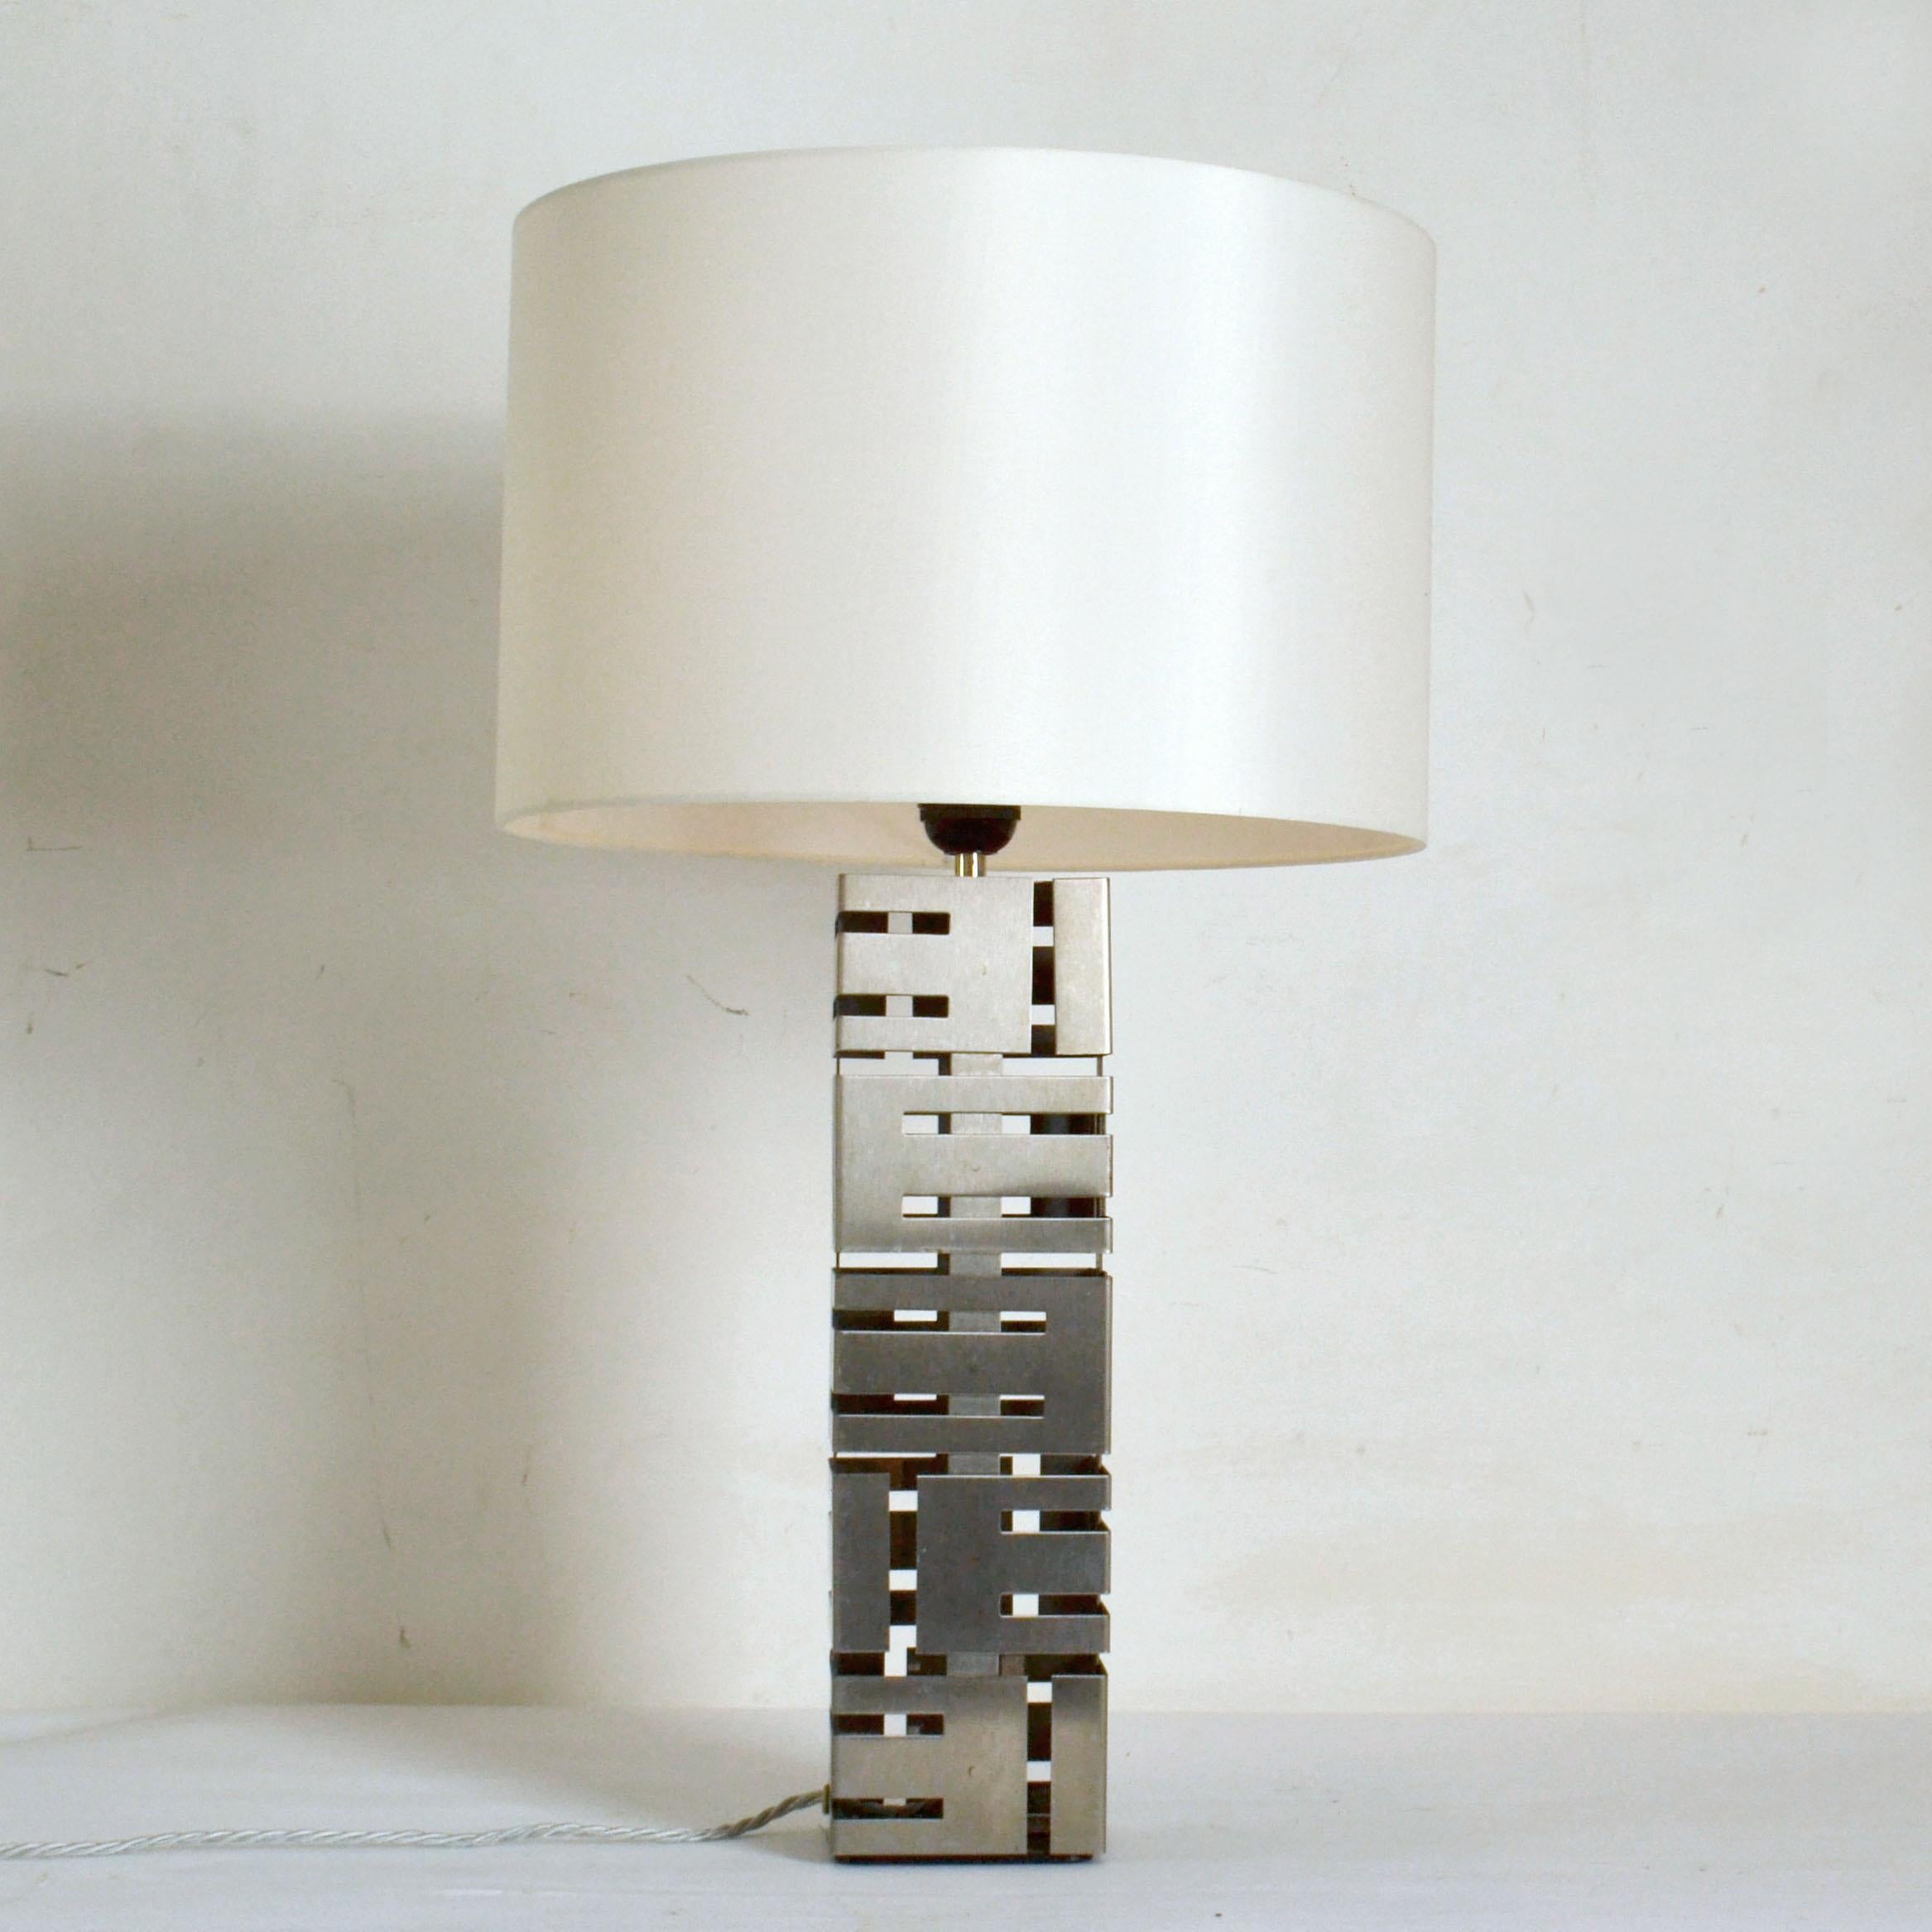 Two rectangular shaped brushed stainless steel lamps with a cut out design stainless steel panels on this pair of Laurel table lamp have two alternating heights. They come with ivory colour drum shades. 
Laurel lamp Mfg Company Inc. is a lighting